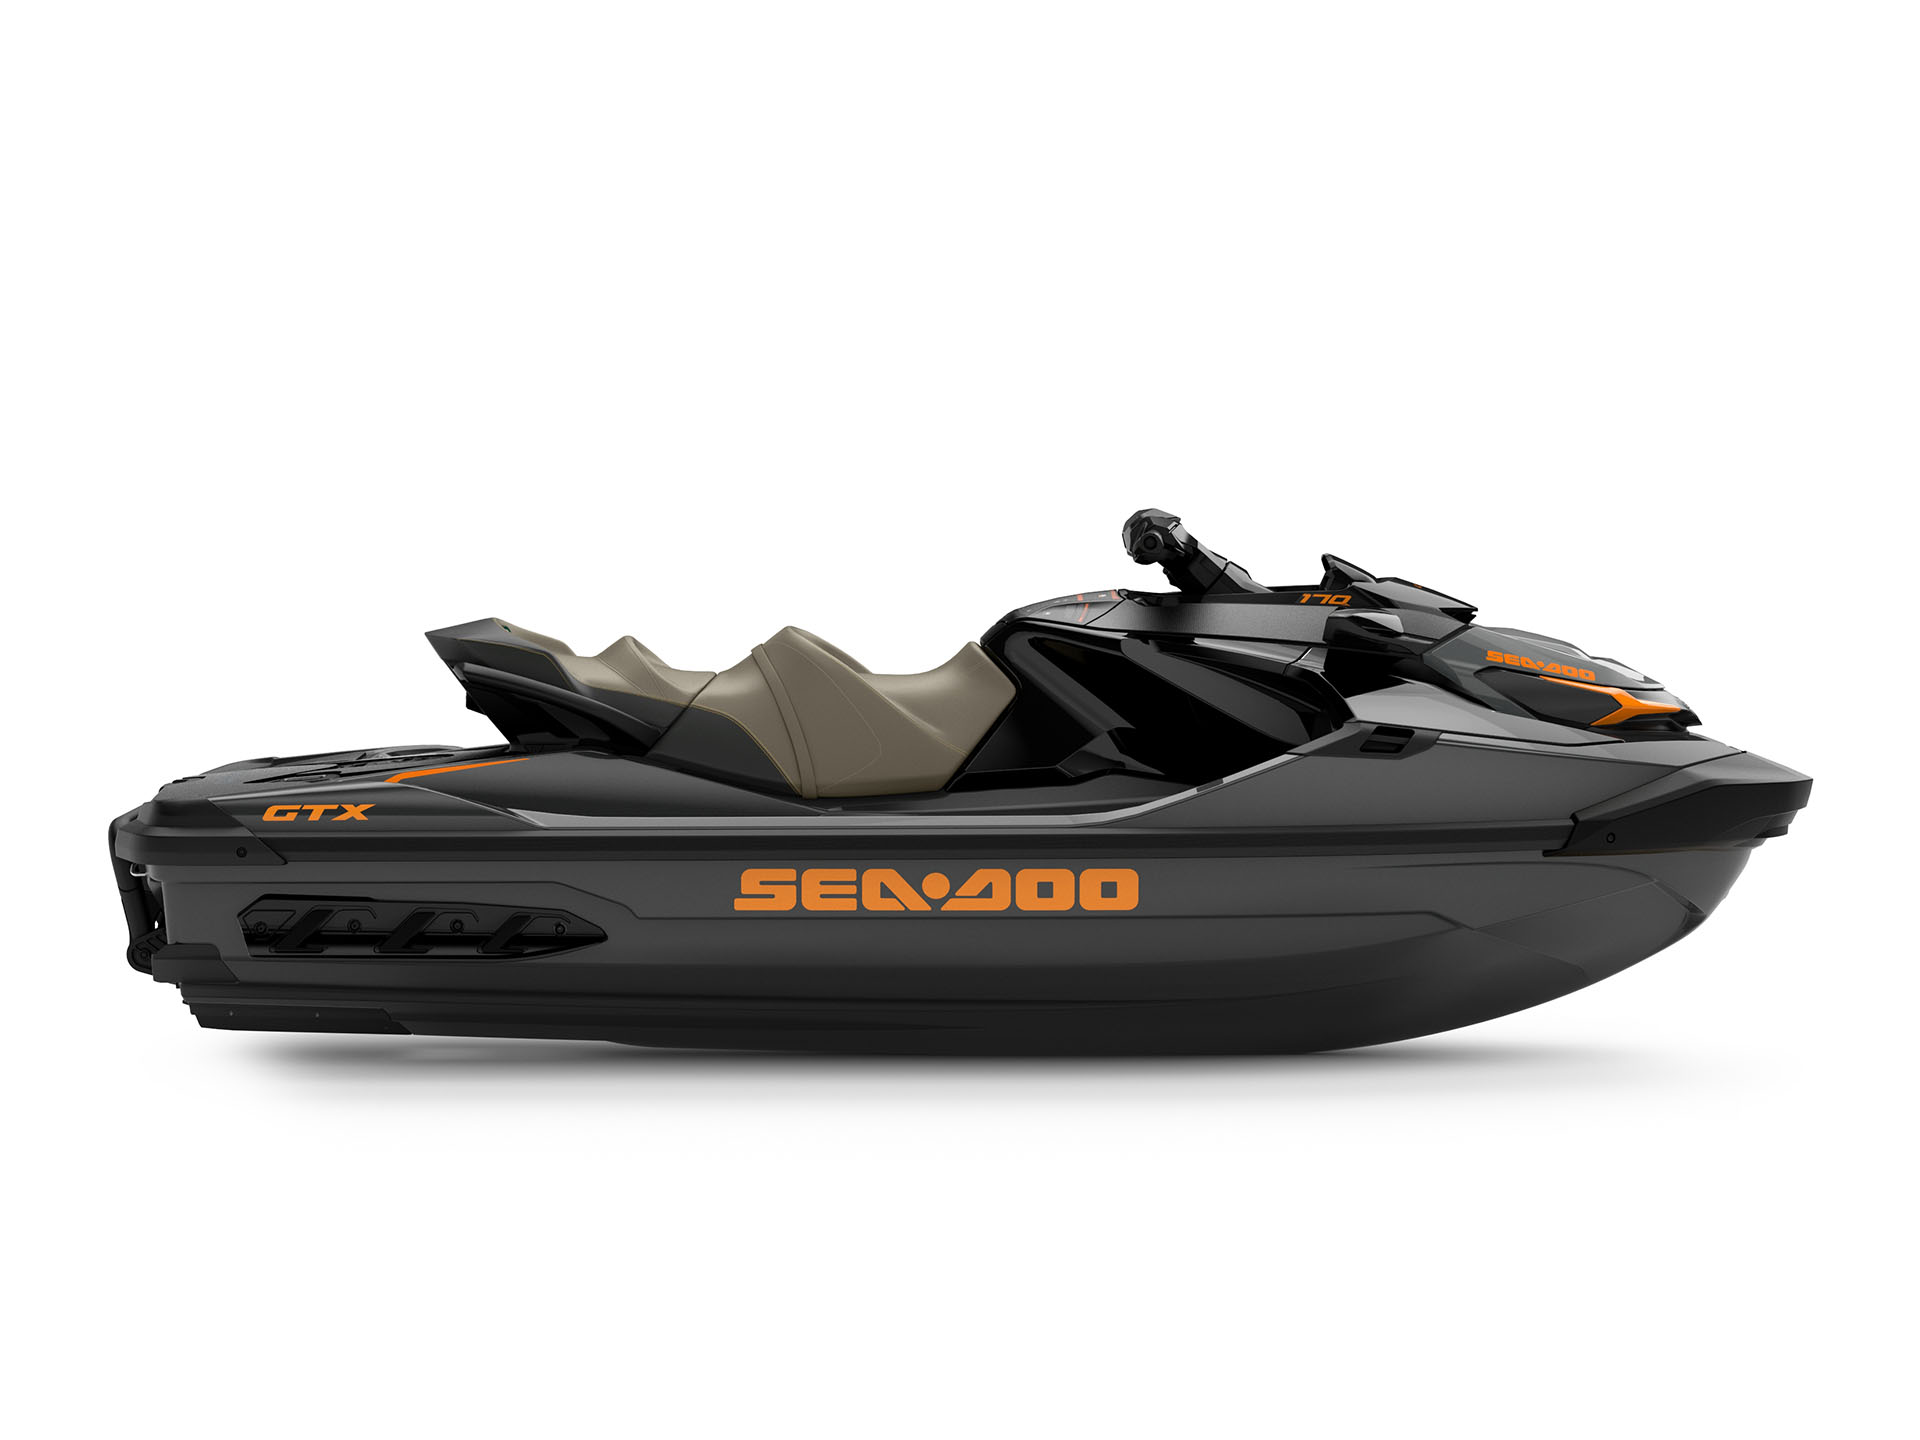 Discover the Sea-Doo lineup with Hubbard Powersports